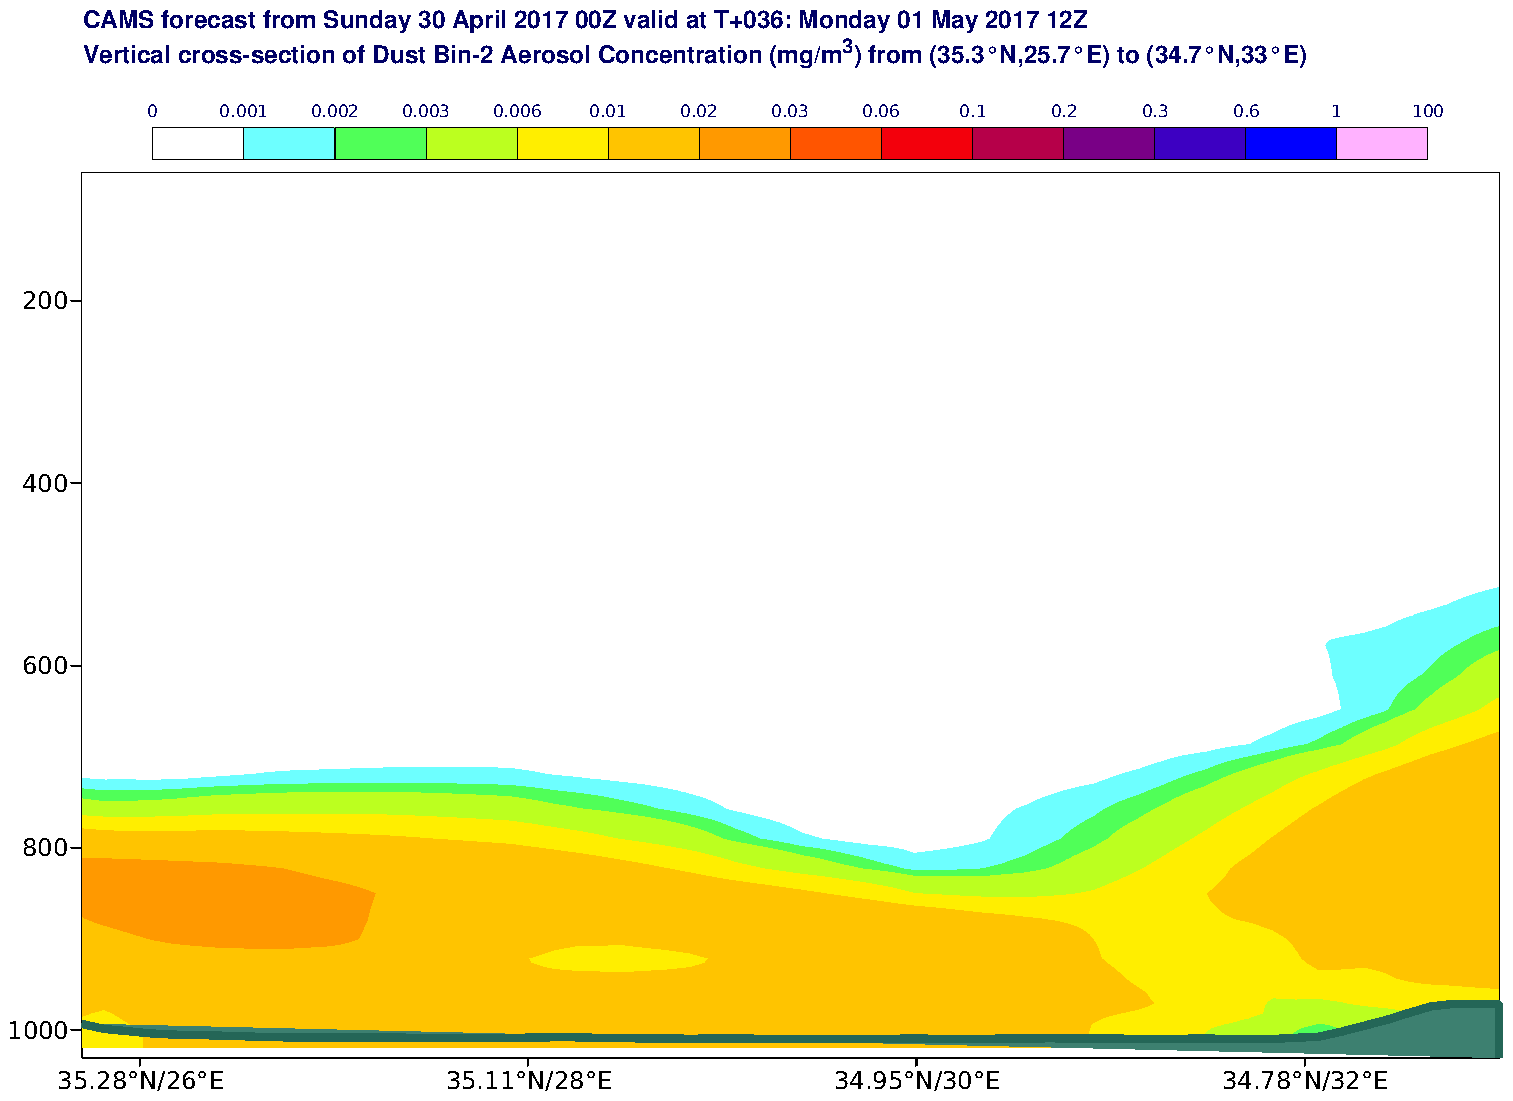 Vertical cross-section of Dust Bin-2 Aerosol Concentration (mg/m3) valid at T36 - 2017-05-01 12:00